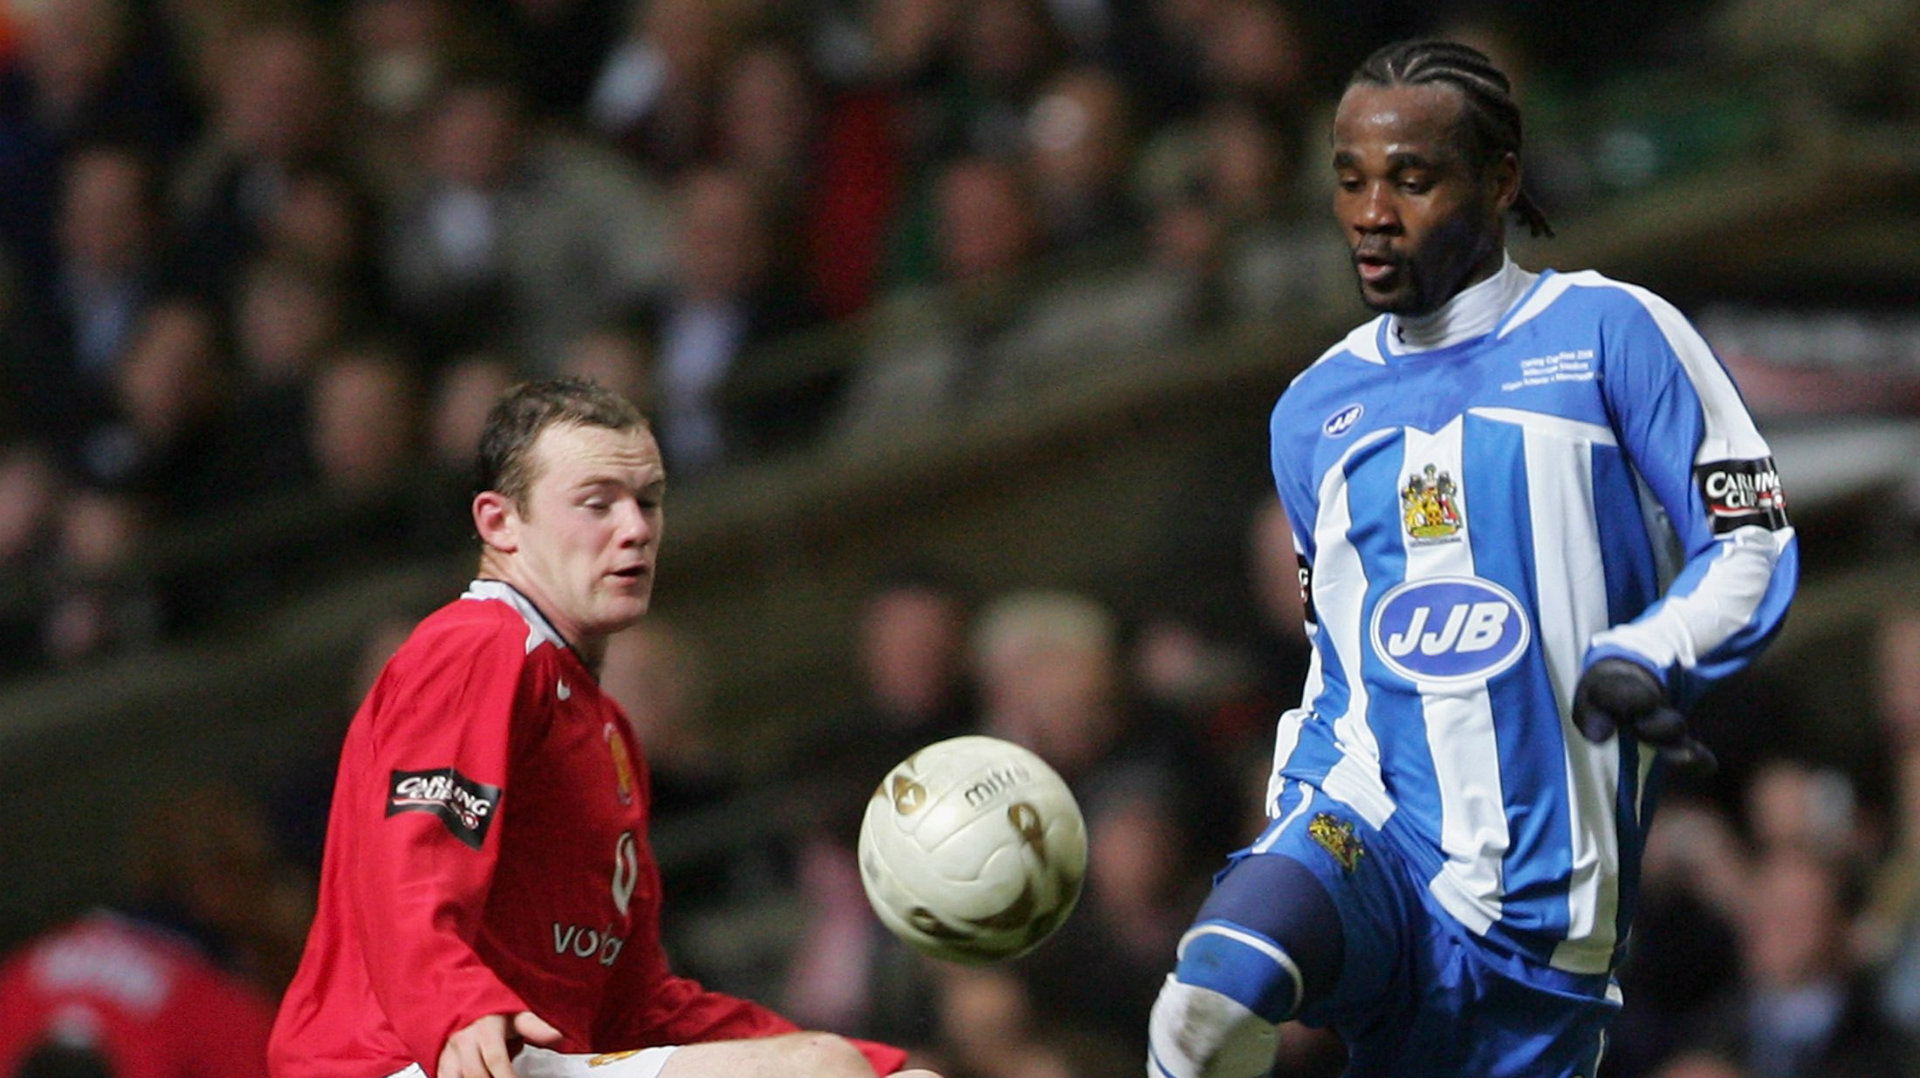 'That’s my biggest regret' - Chimbonda feels Man Utd move was scuppered by Wigan transfer request